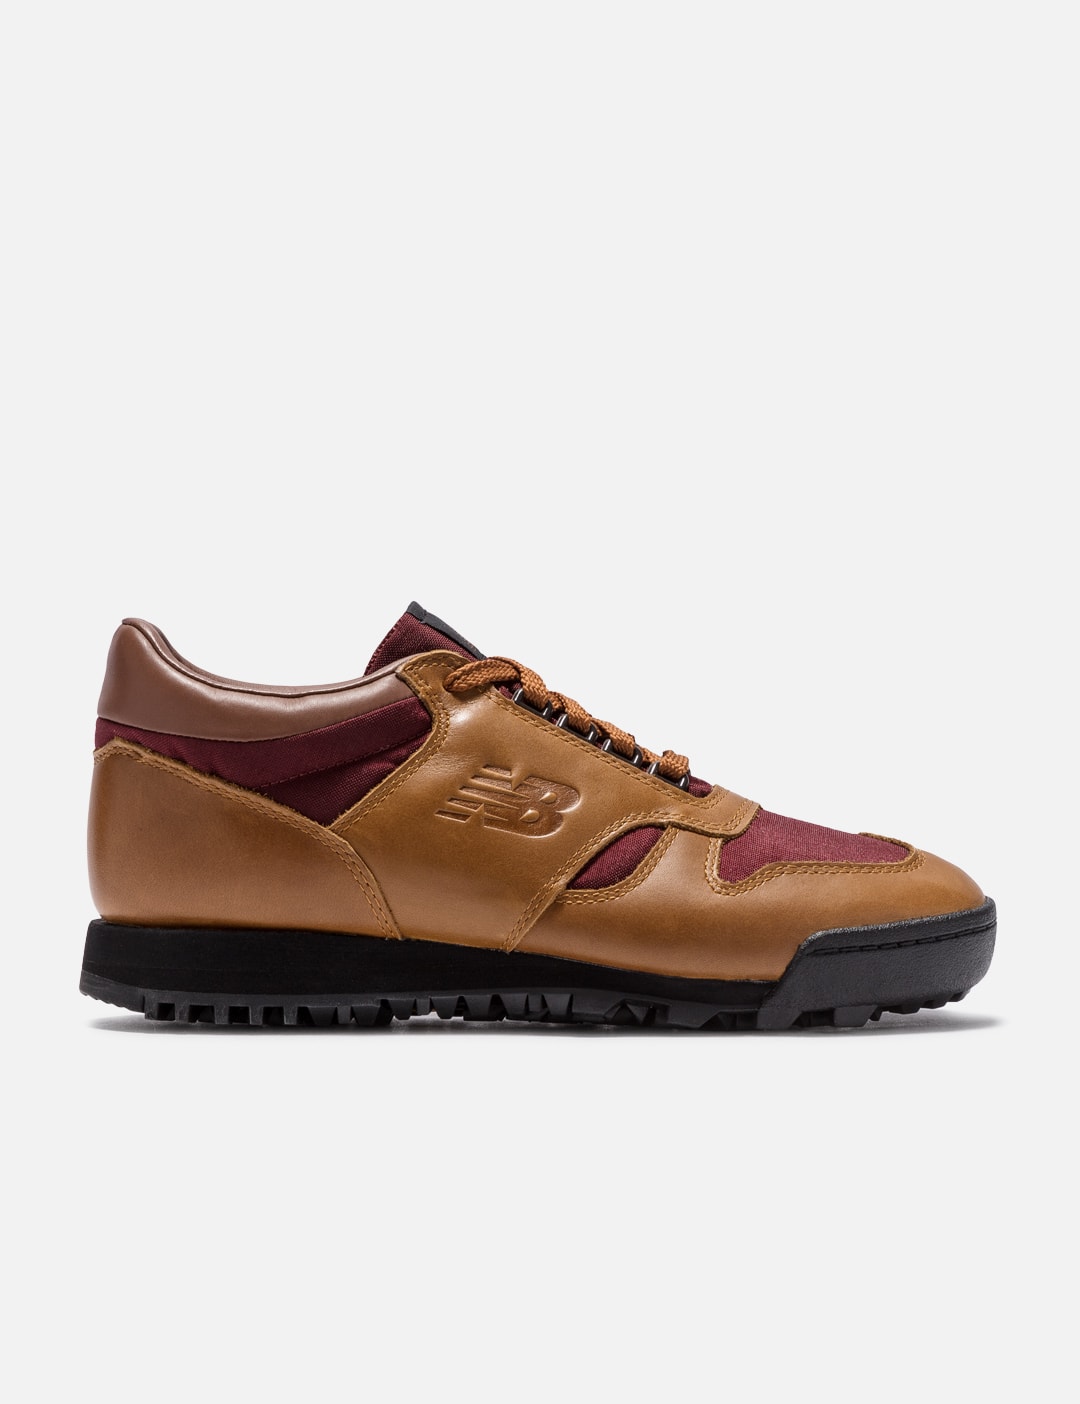 New Balance - Rainer Low “Glazed Ginger” | HBX - Globally Curated ...